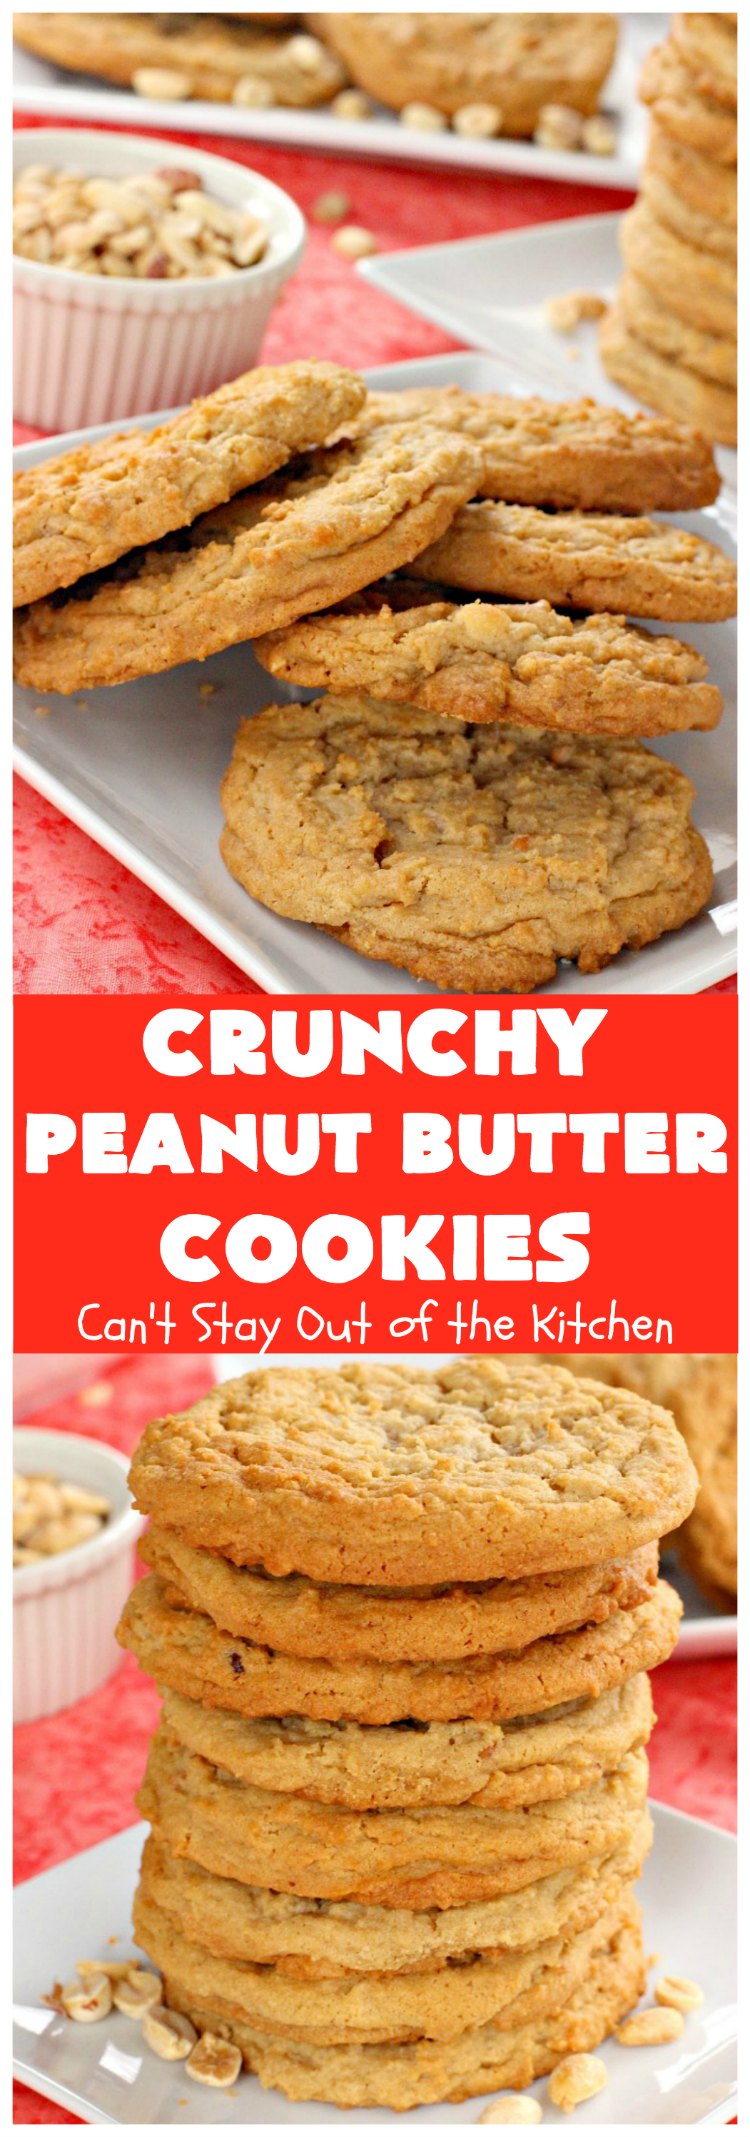 Crunchy Peanut Butter Cookies | Can't Stay Out of the Kitchen | these luscious whopper-sized #PeanutButterCookies are fantastic. Every bite will knock your socks off. Plus they're easy to make & turn out perfectly each time. #tailgating #cookies #PeanutButter #dessert #PeanutButterDessert #CrunchyPeanutButterCookies 